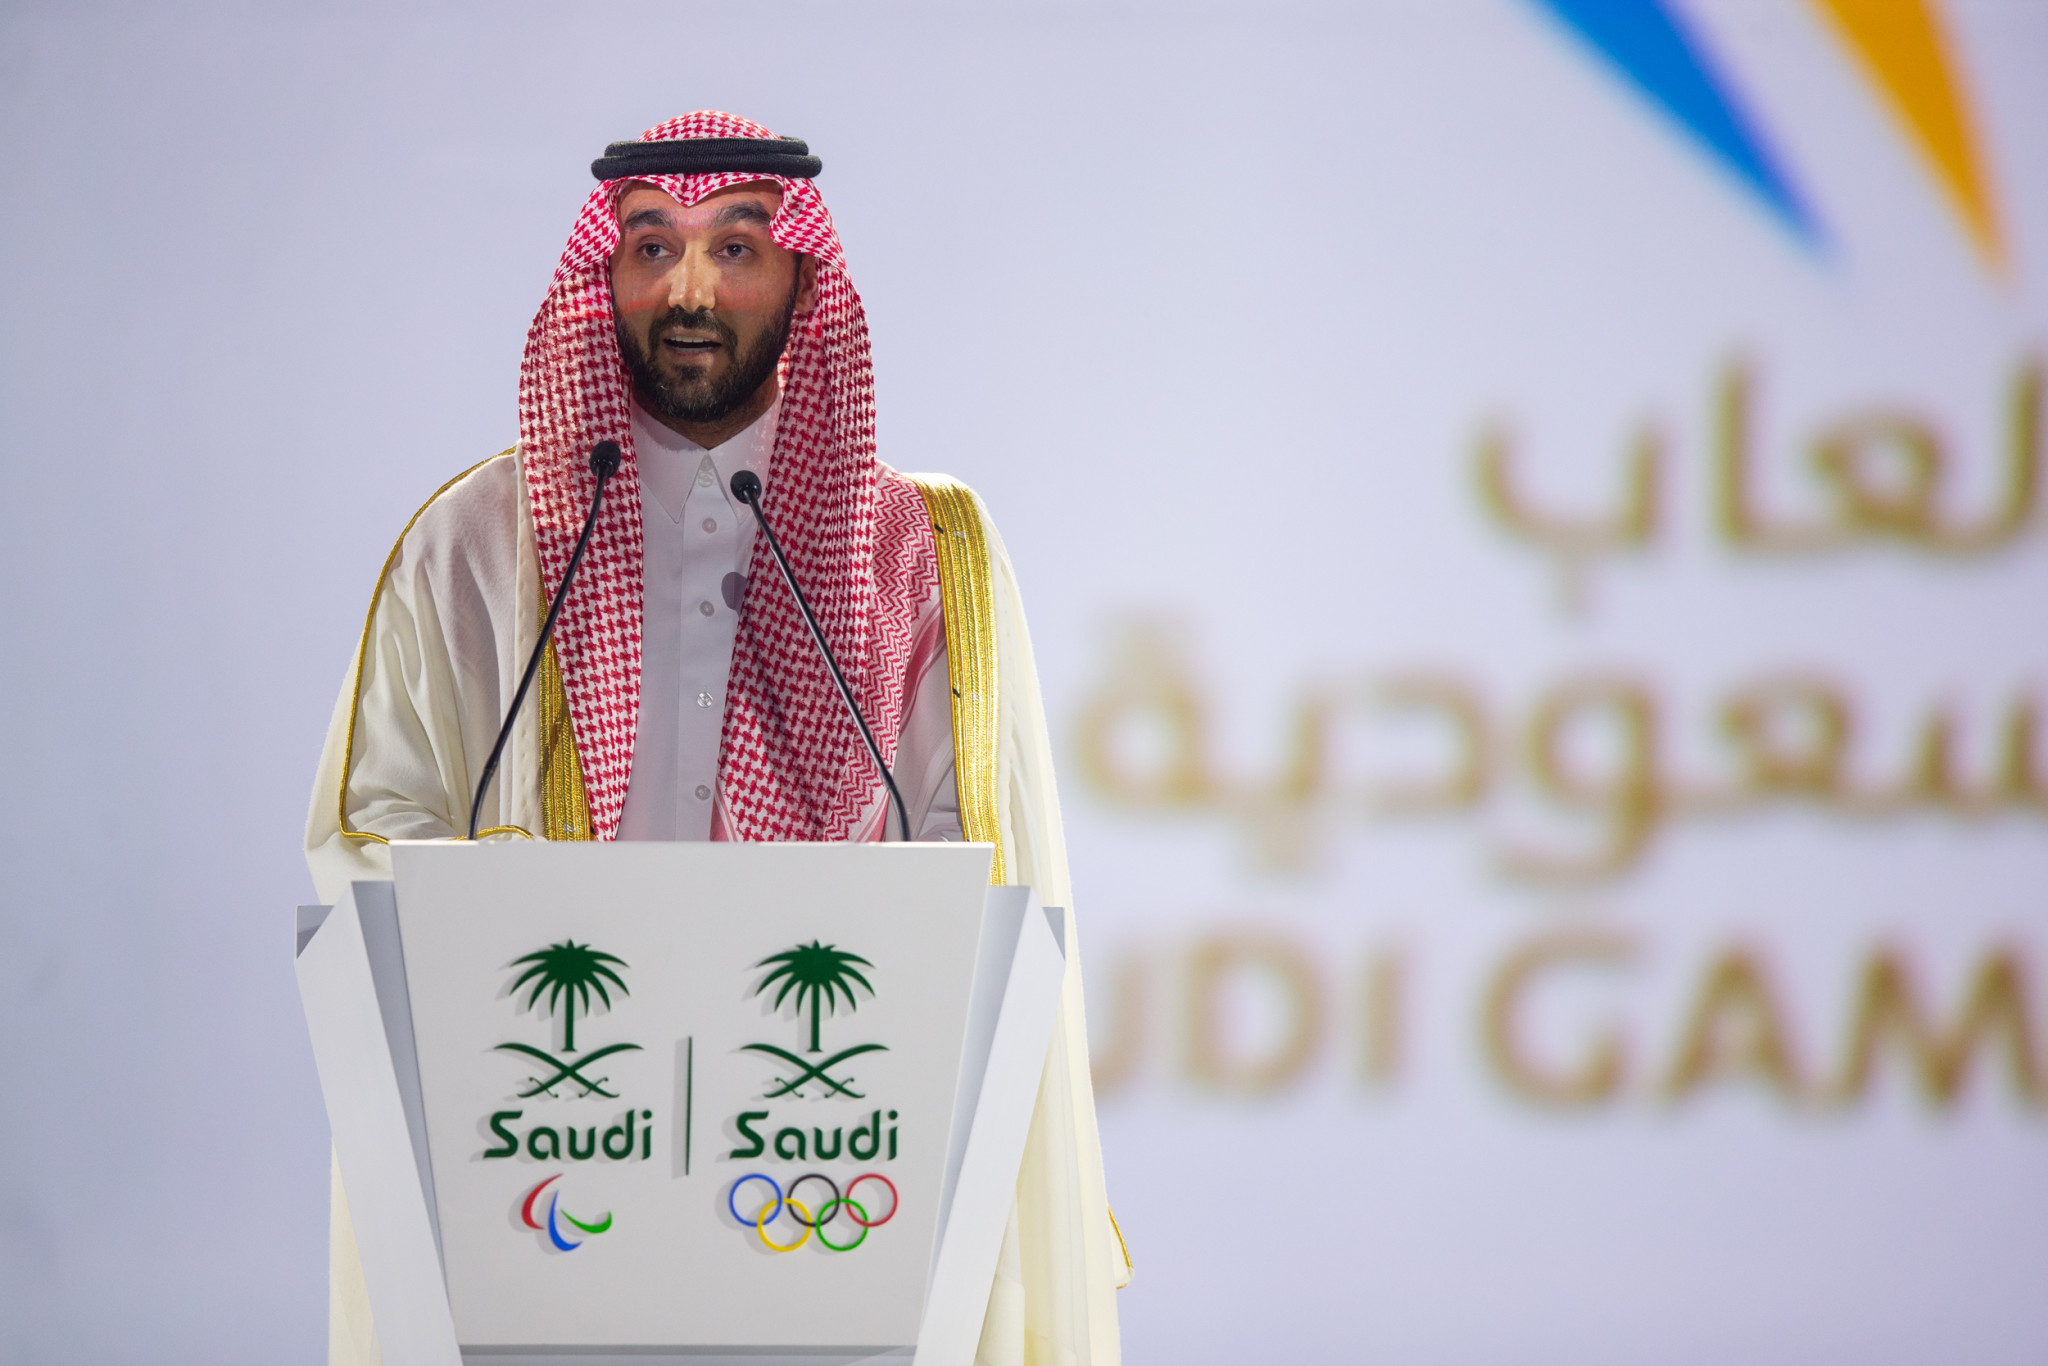 Sports Minister Prince Abdulaziz hopes Saudi Games can shape national sport at Opening Ceremony